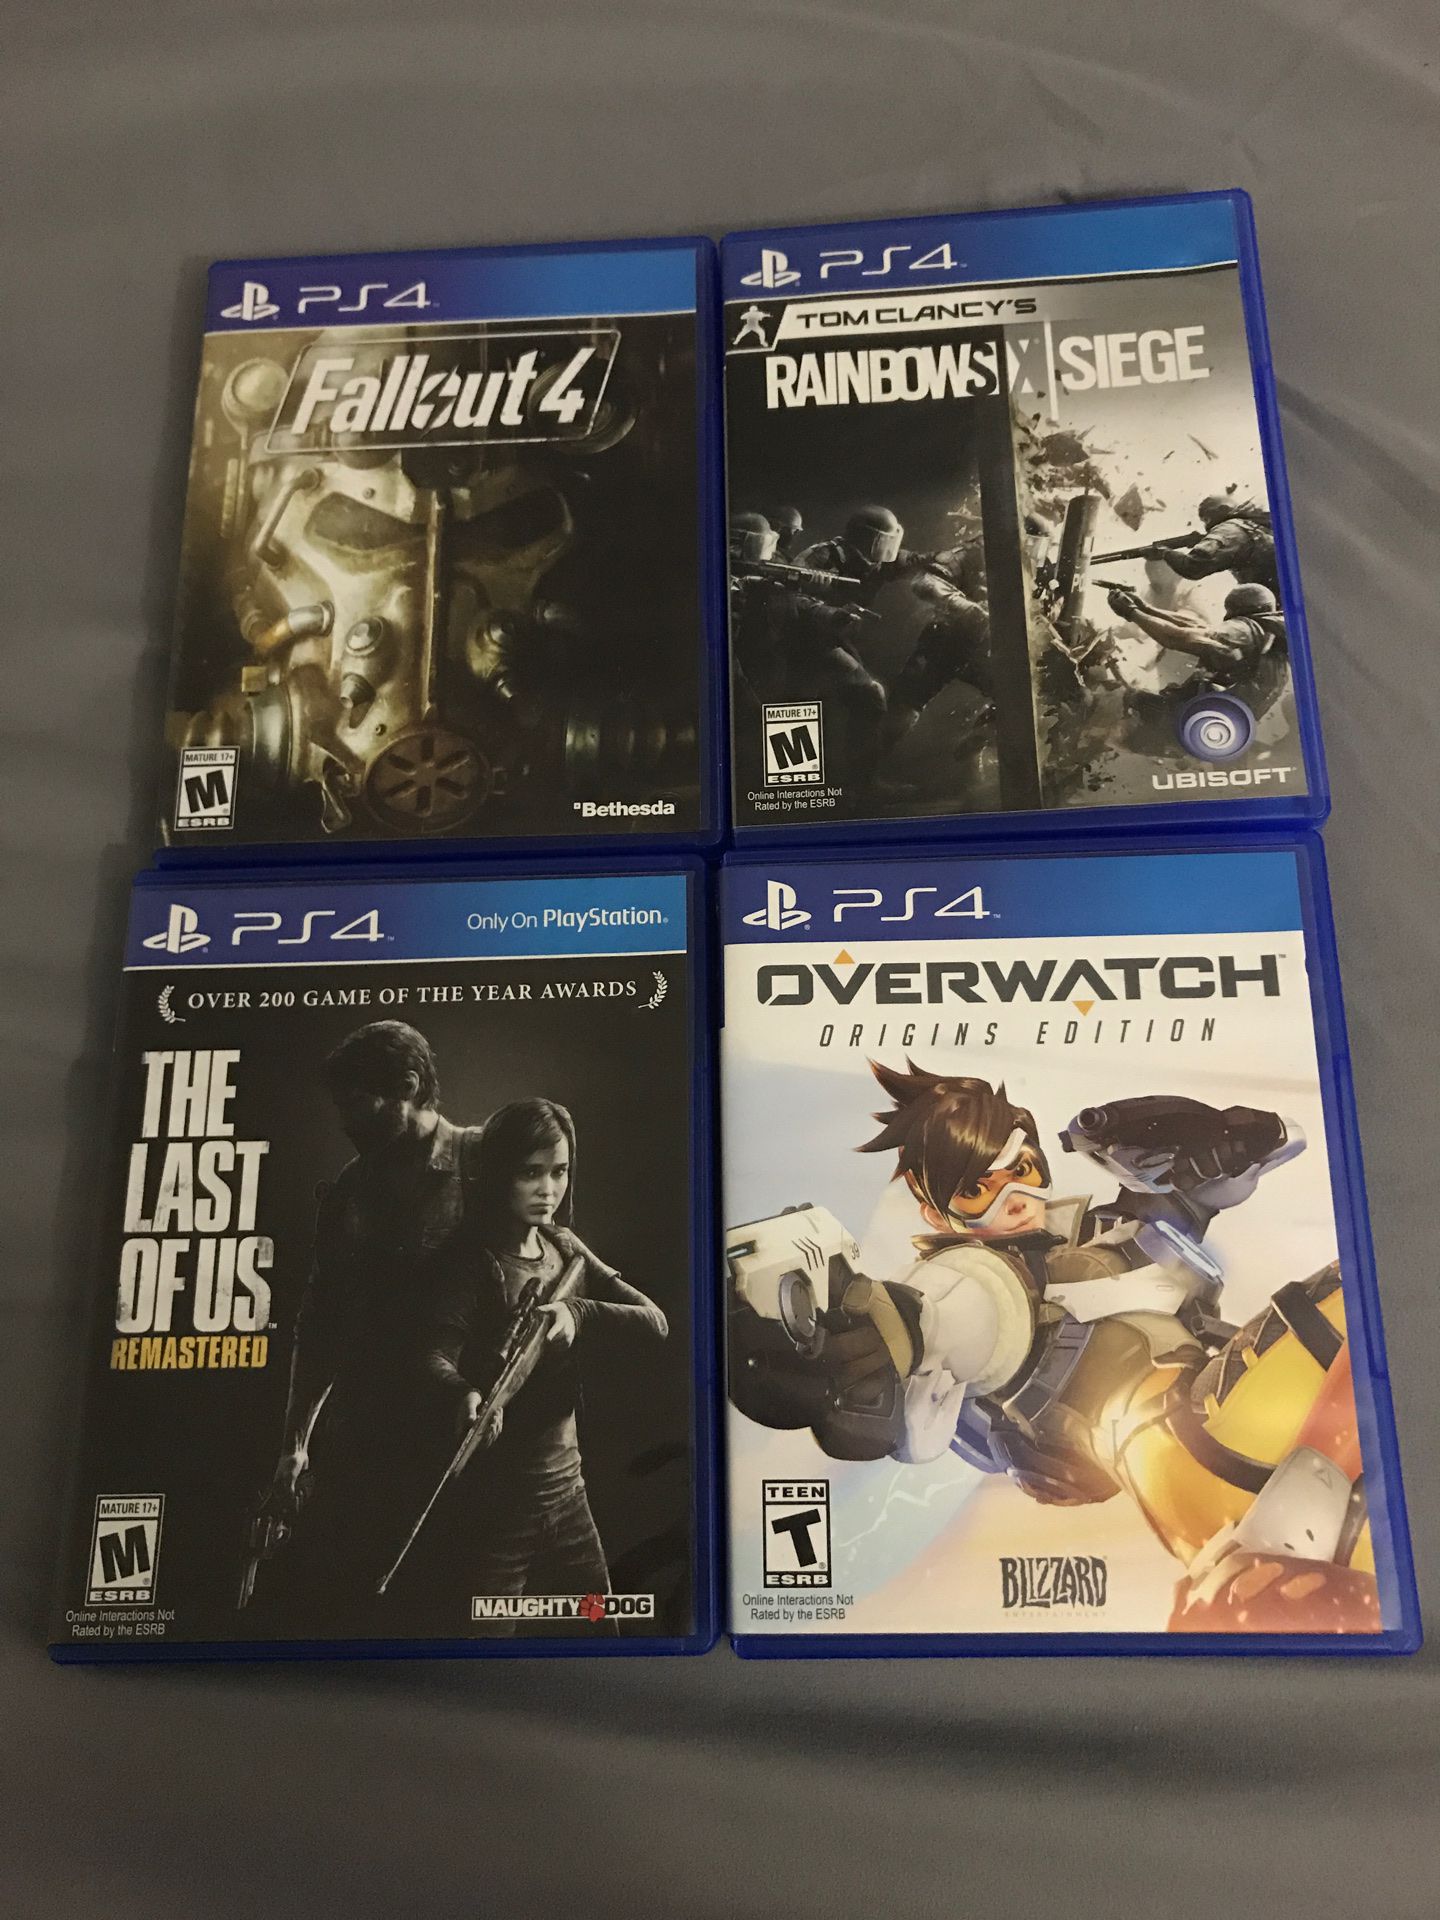 Fallout 4, Overwatch, The Last of Us and Rainbow Six Siege $15 EACH